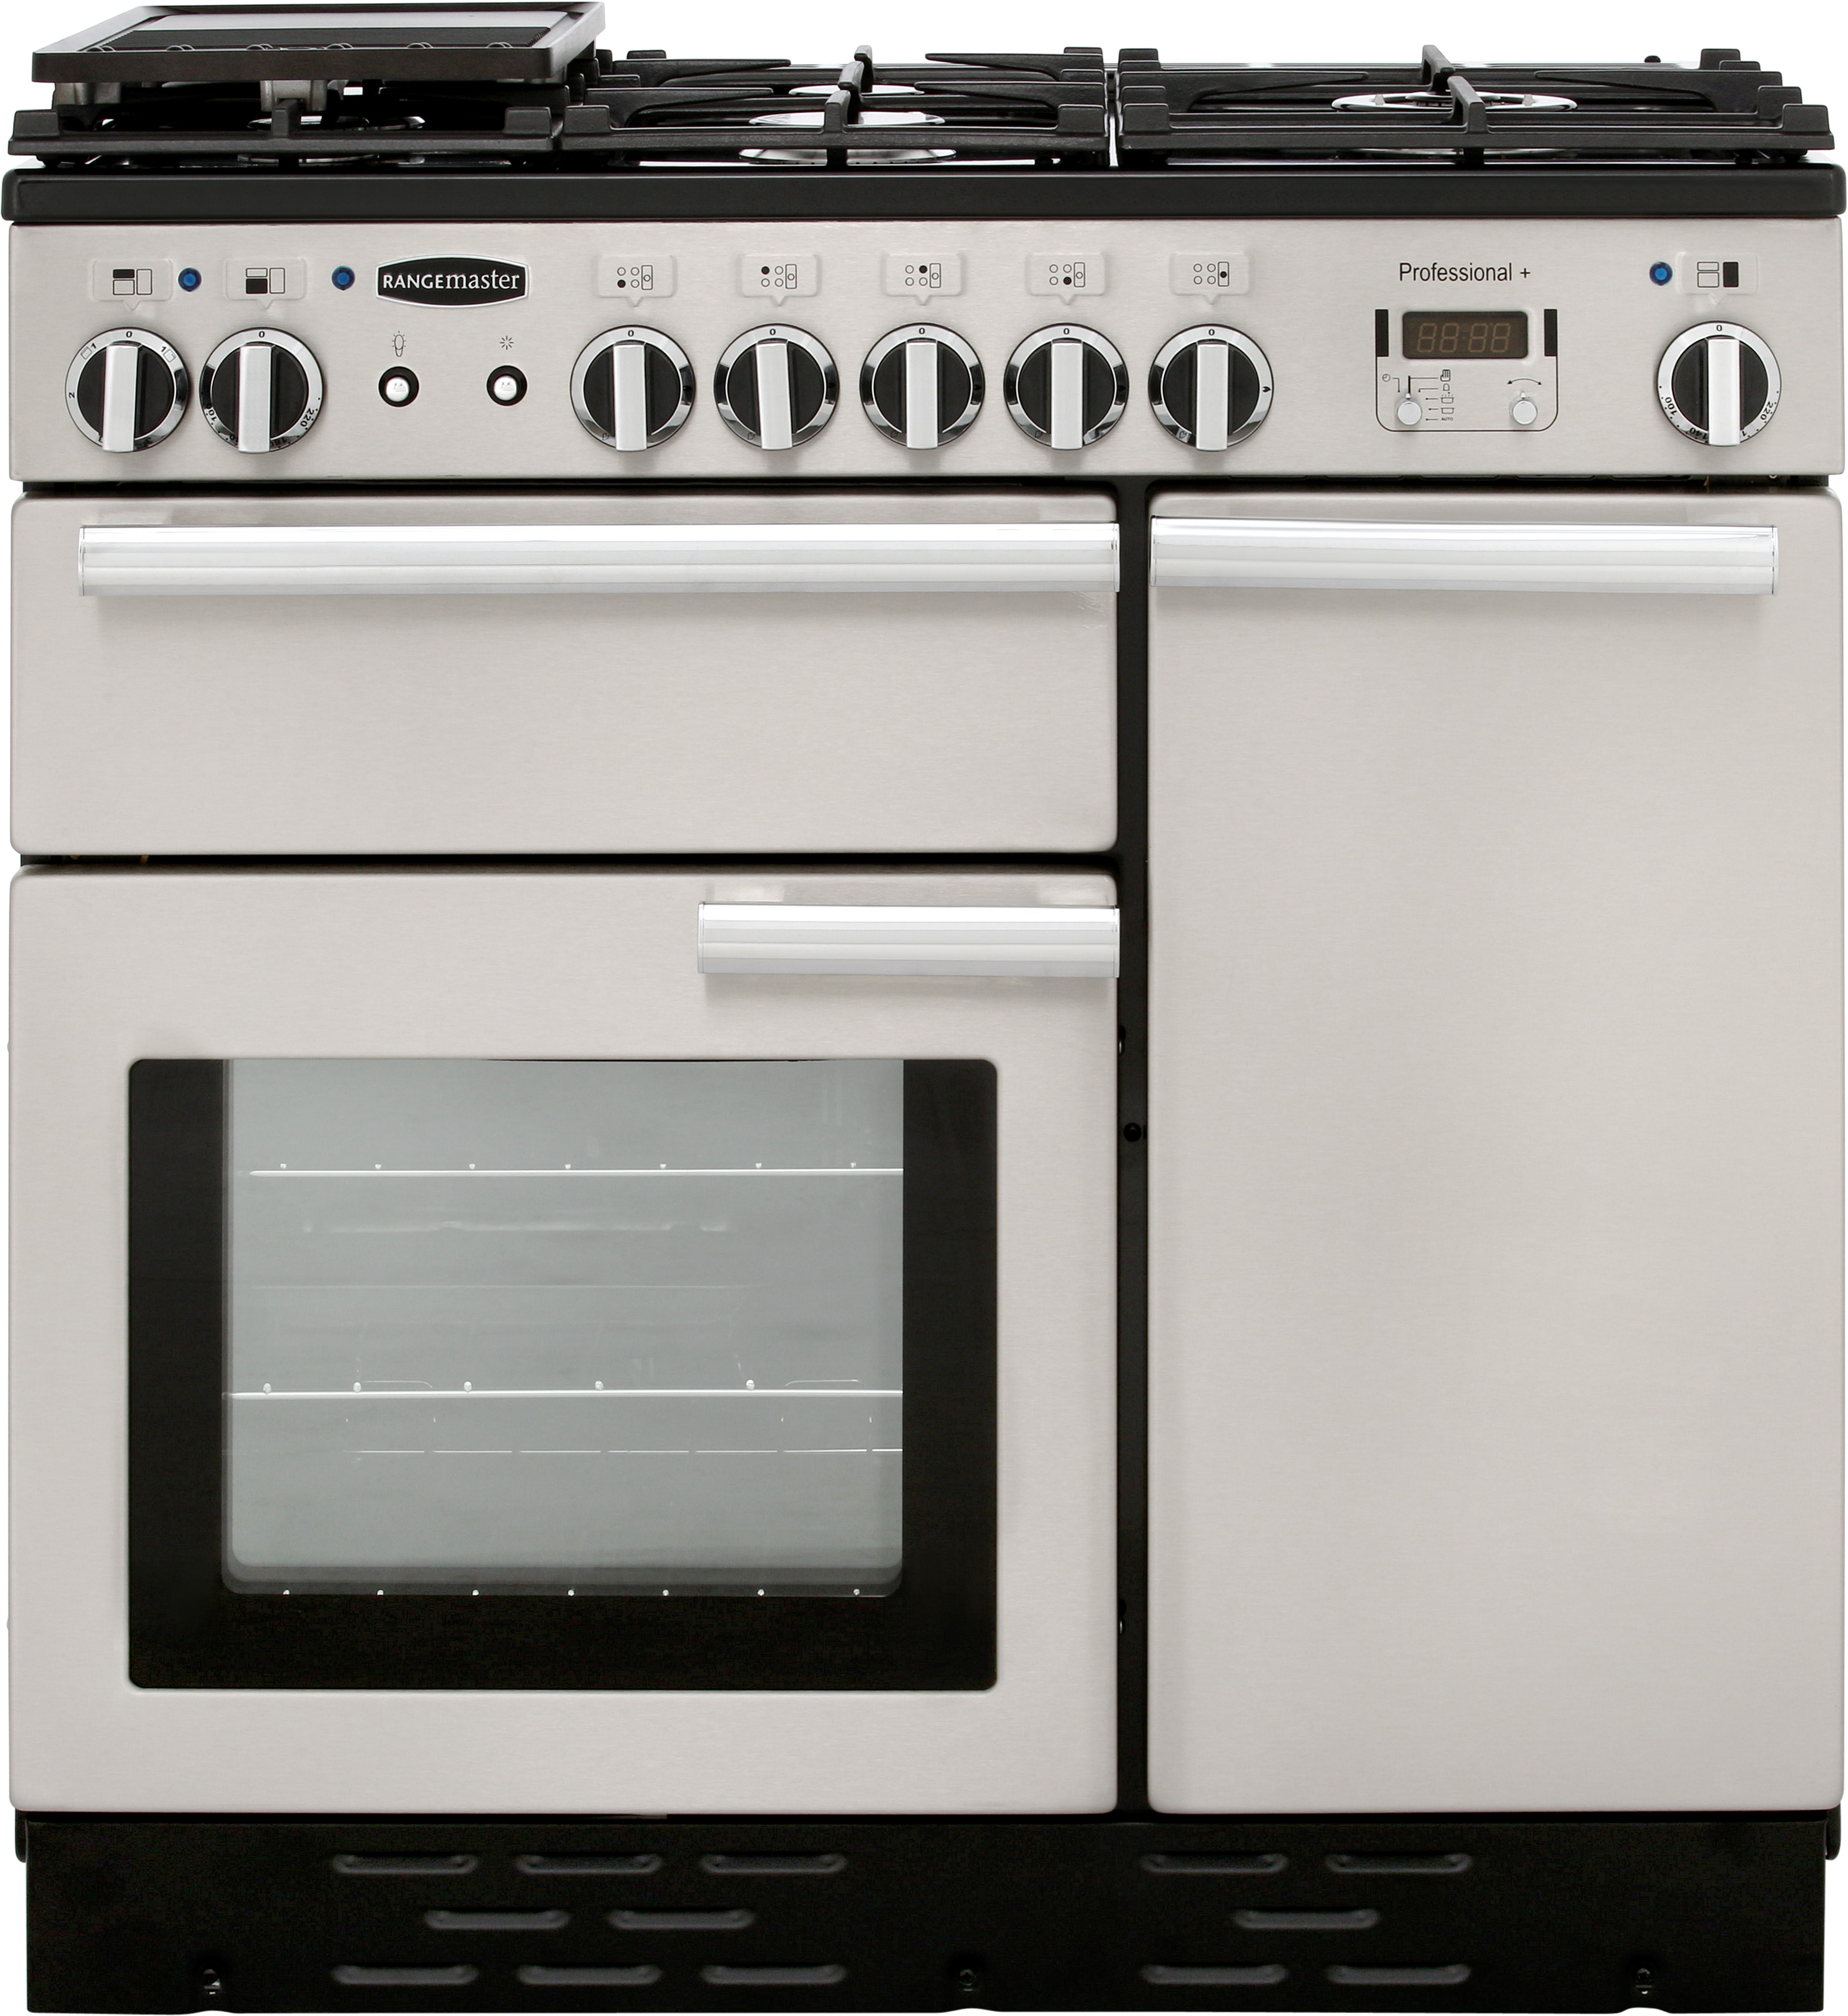 Rangemaster Professional Plus PROP90DFFSS/C 90cm Dual Fuel Range Cooker - Stainless Steel - A/A Rated, Stainless Steel